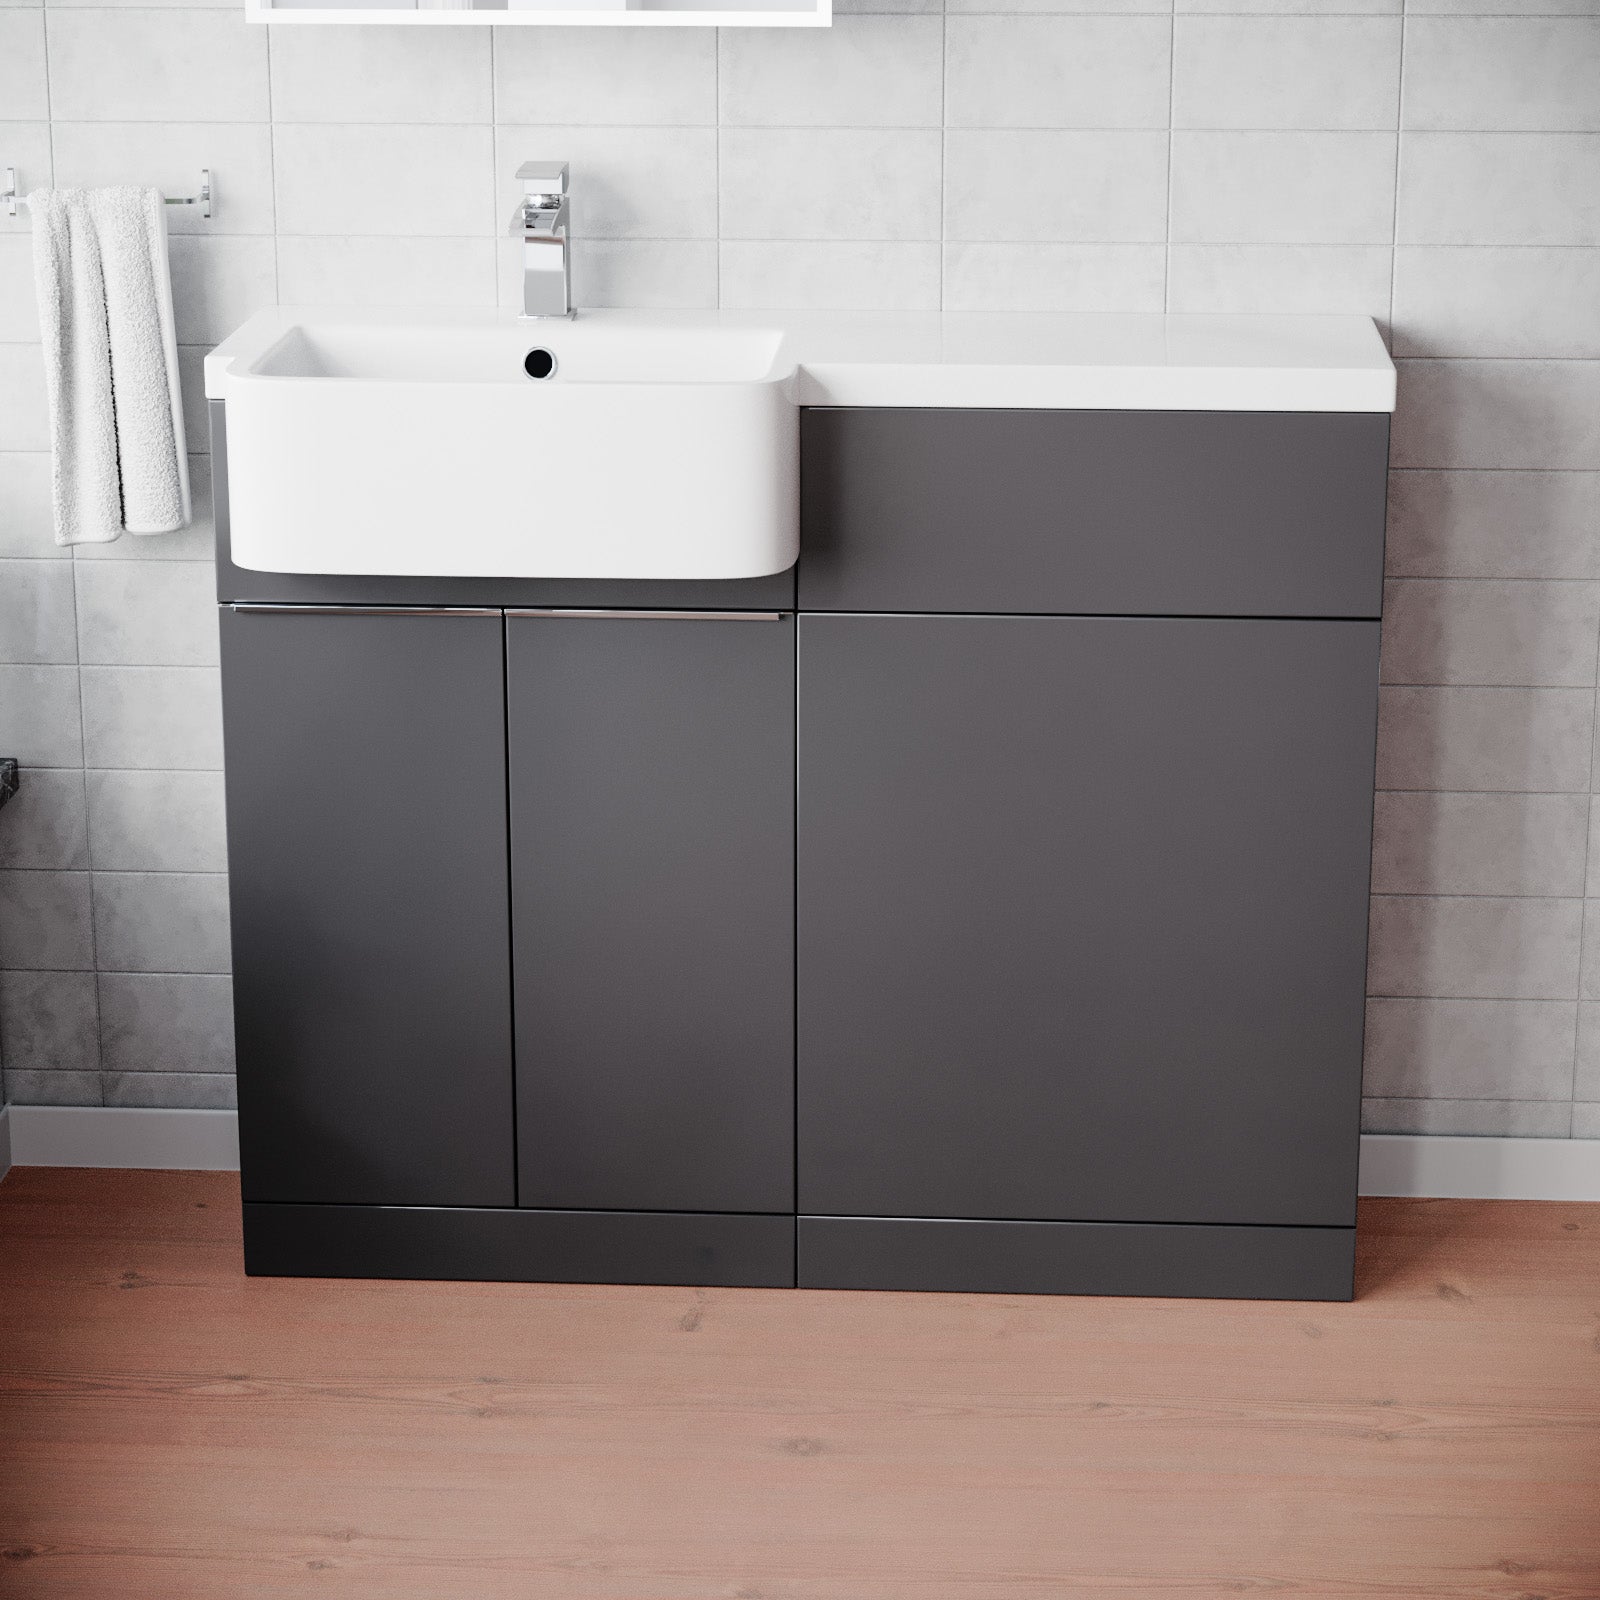 Haoran 1000mm Freestanding Anthracite Cabinet with Basin & WC Unit